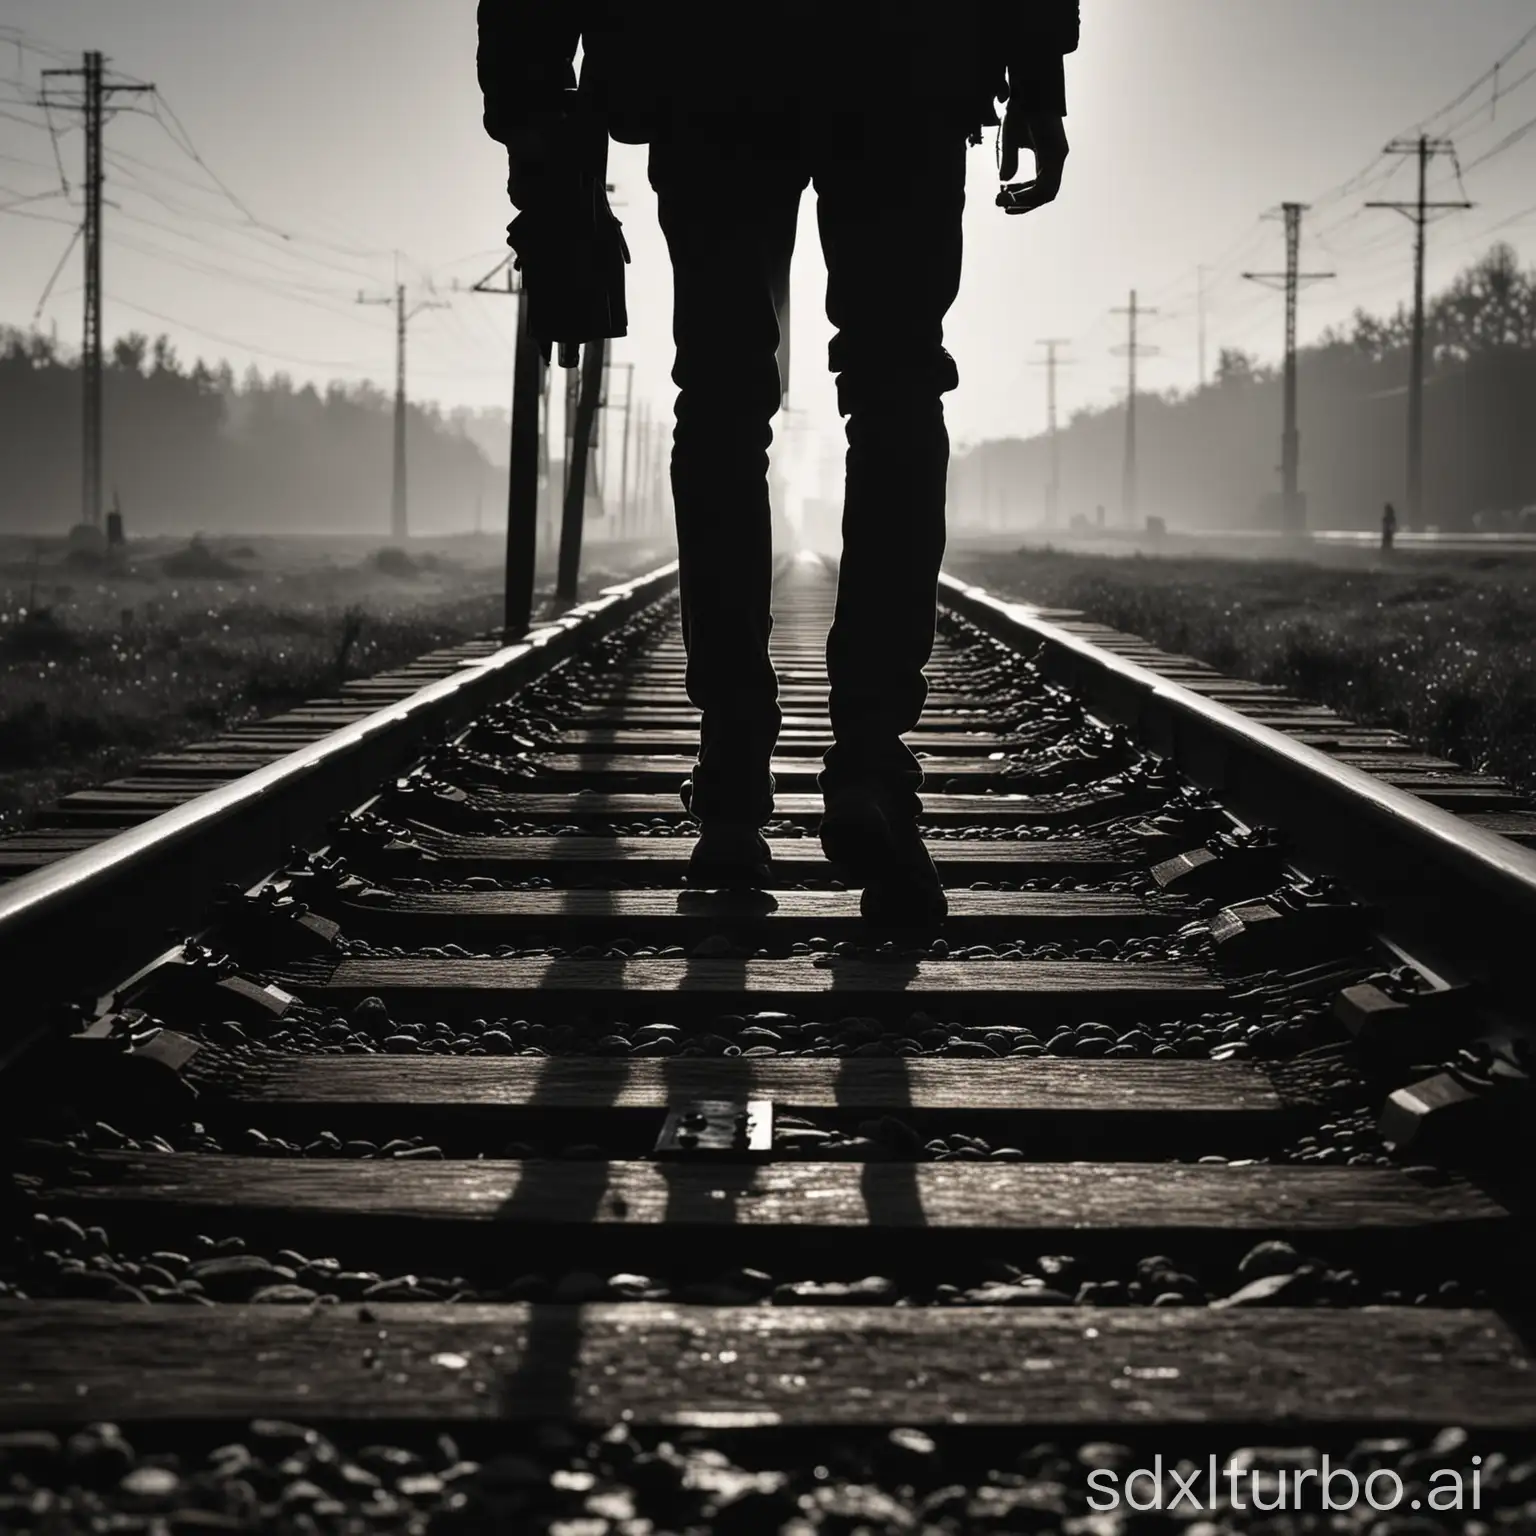 A person, silhouette, walking on the railway track, perspective view, isolated composition,